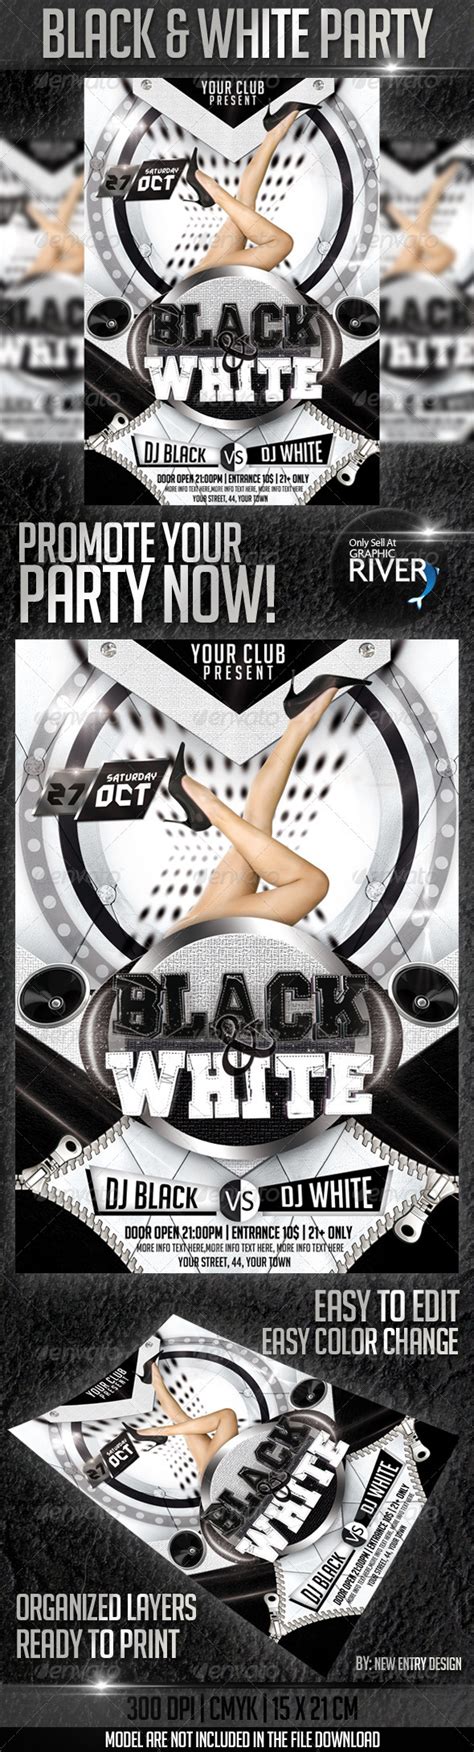 Review Black And White Party Flyer Template Codesign Magazine